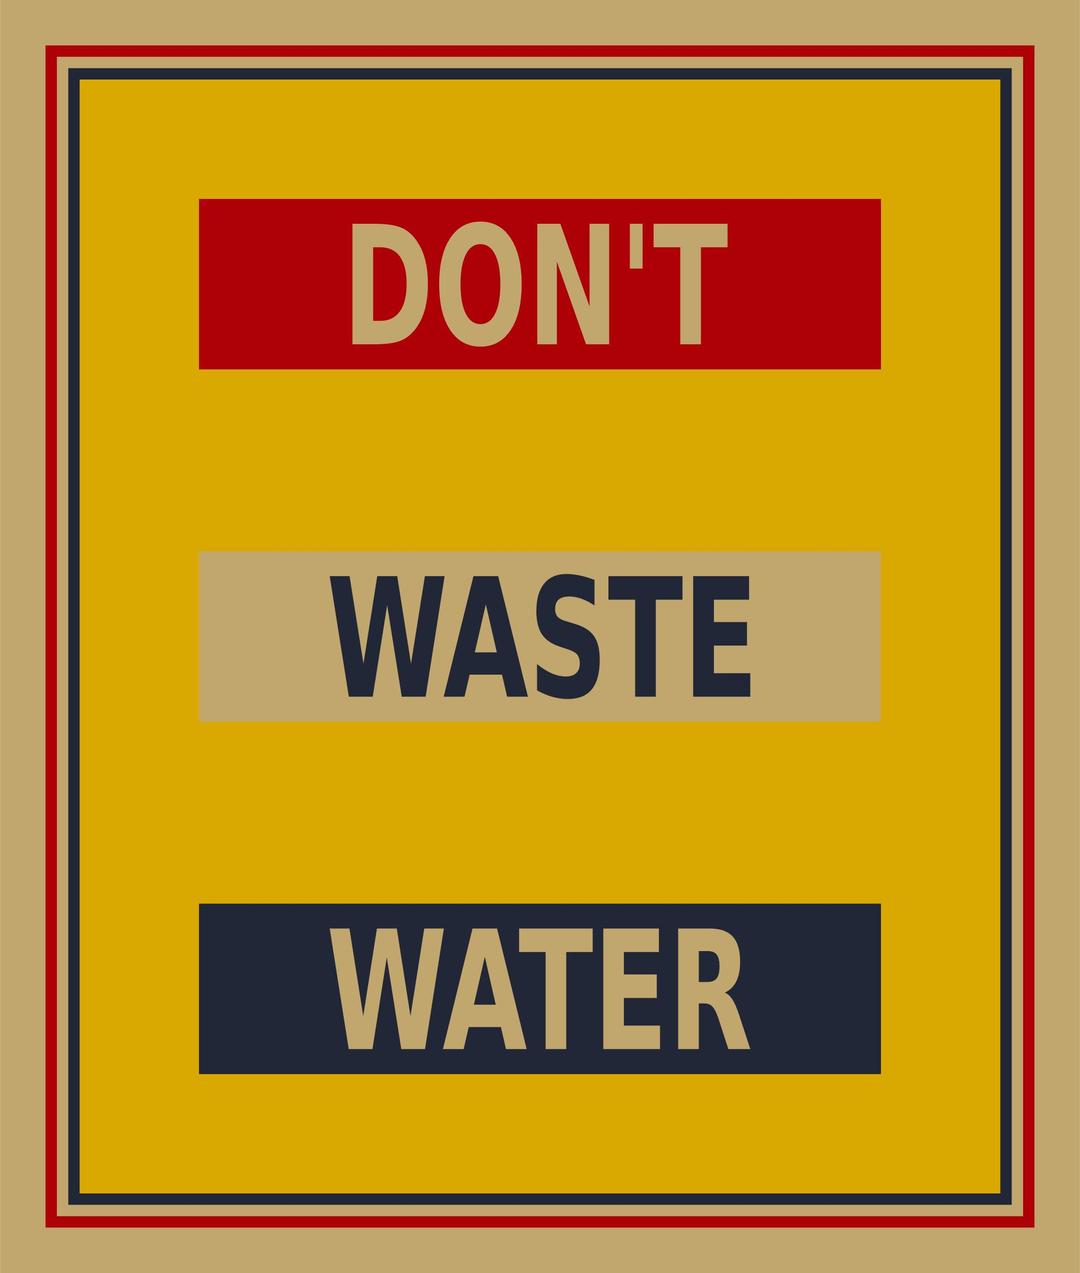 Don't waste water poster png transparent